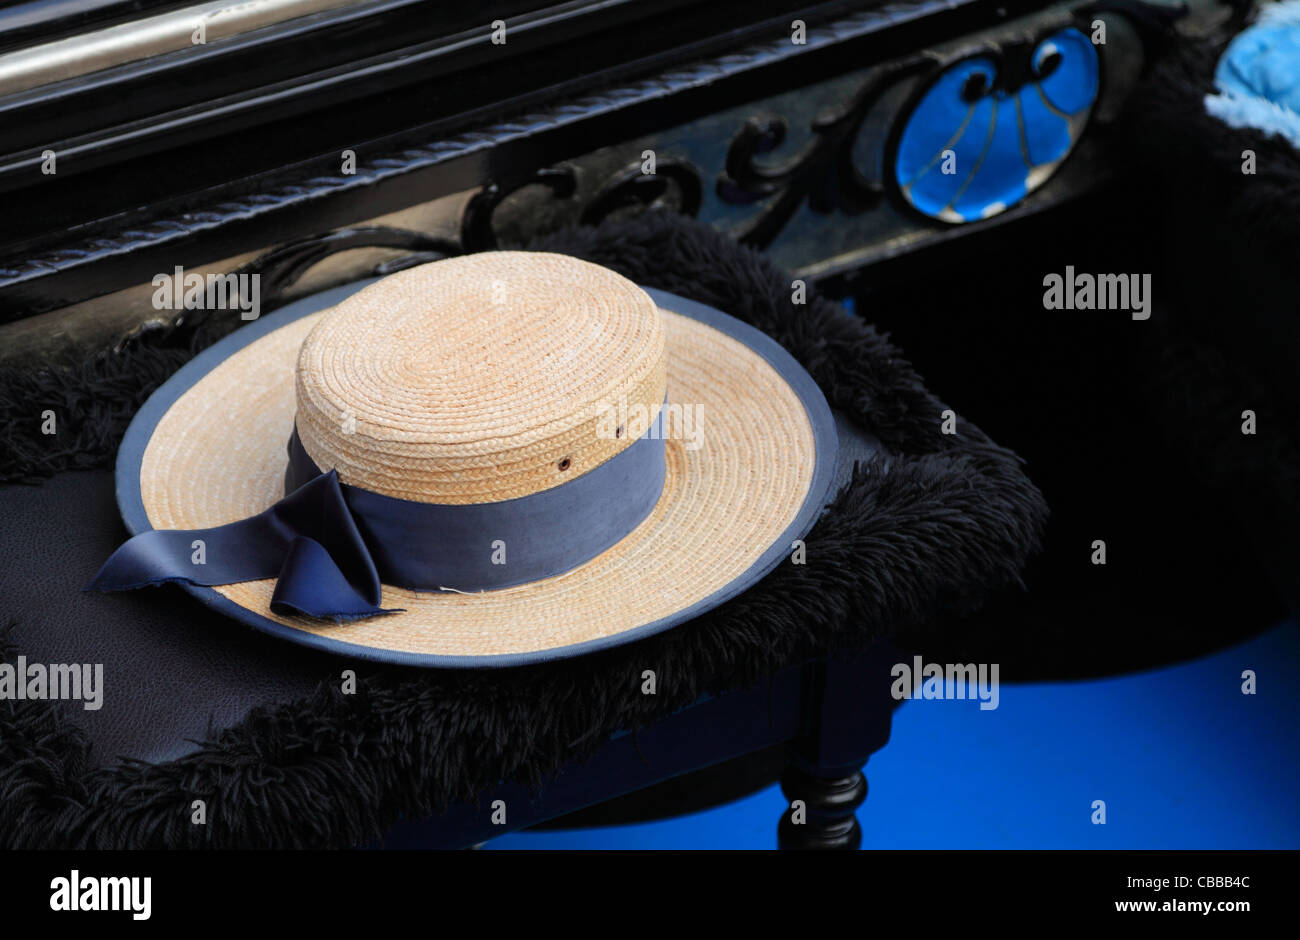 Image of a hat of a gondolier on a specific chair in a gondola. Stock Photo